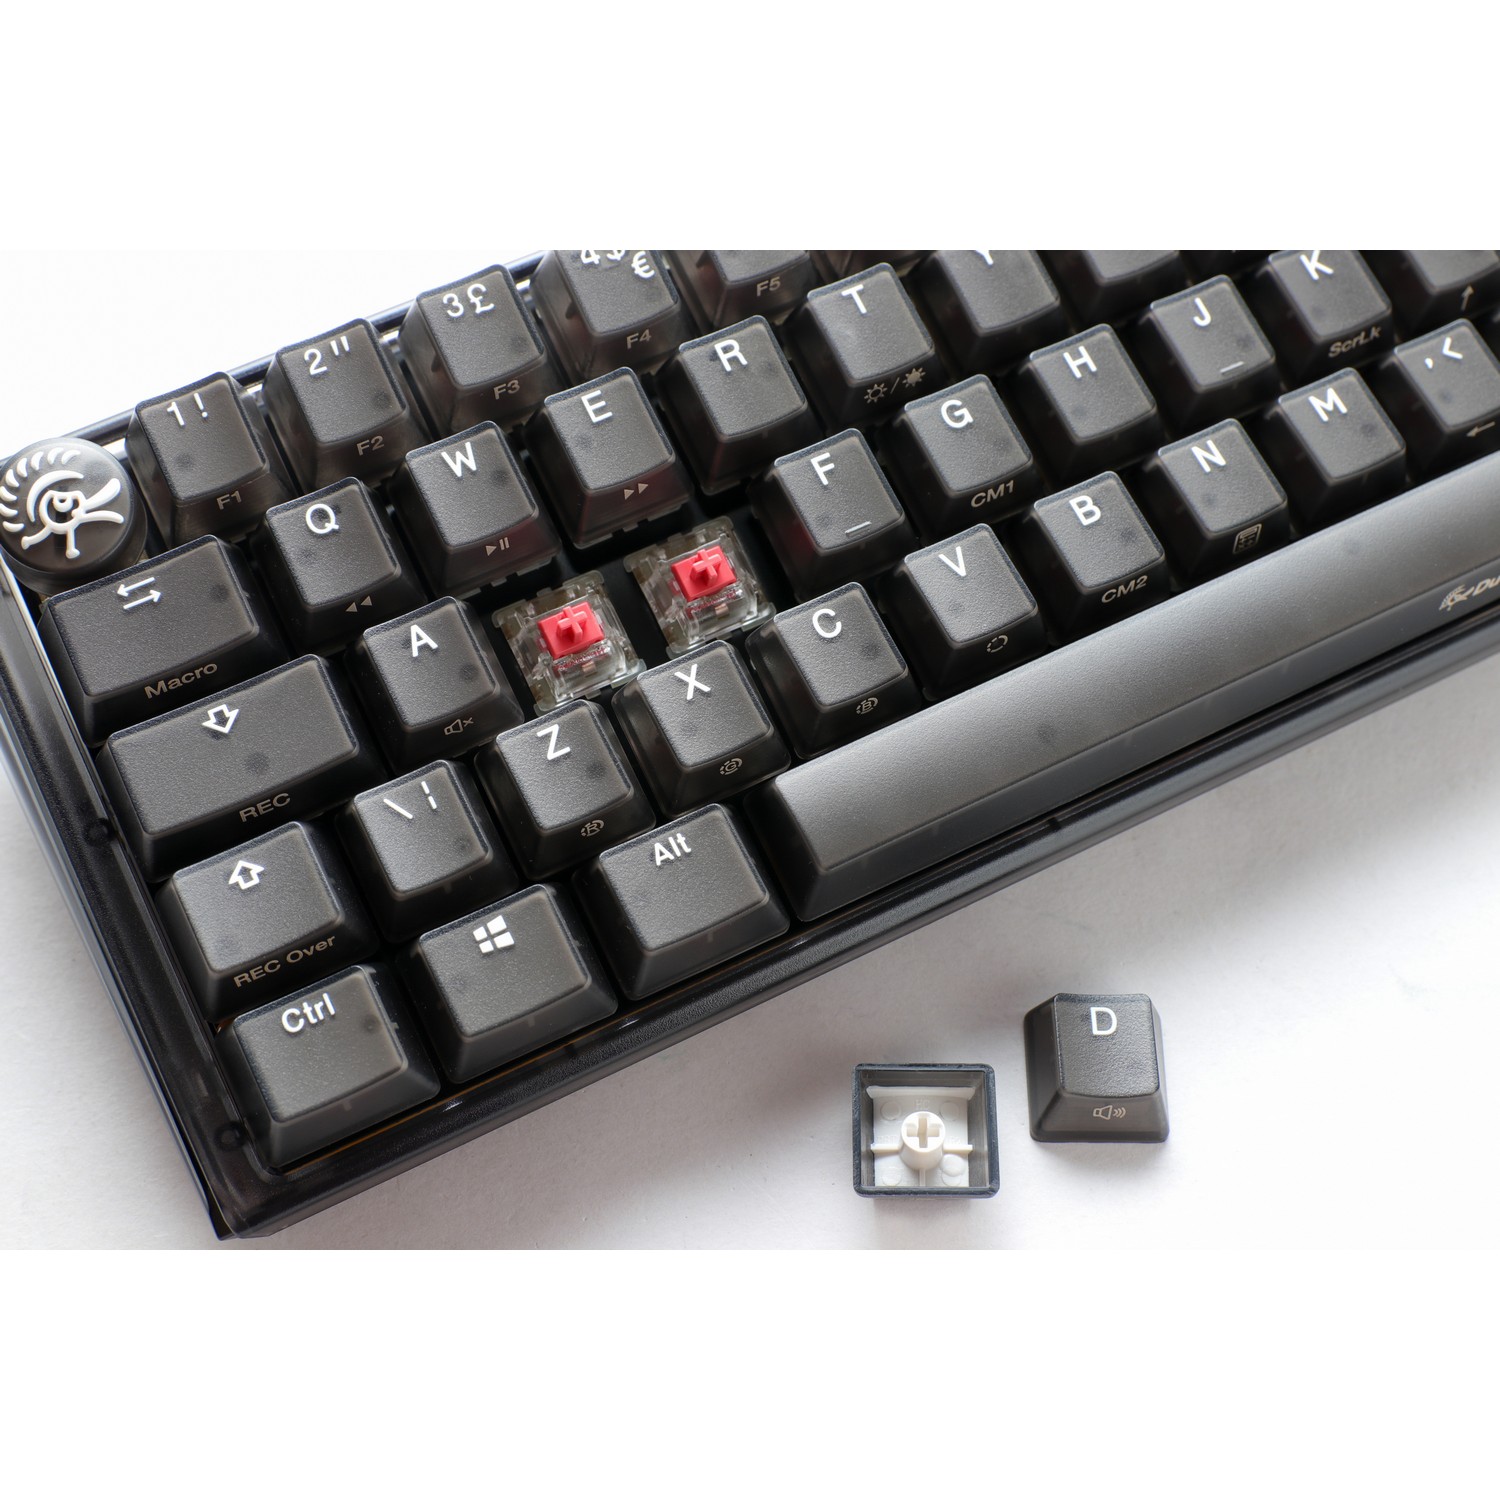 Ducky - Ducky One 3 Aura SF 65% Mechanical Gaming Keyboard Black Cherry Silent Red Switch UK Layout